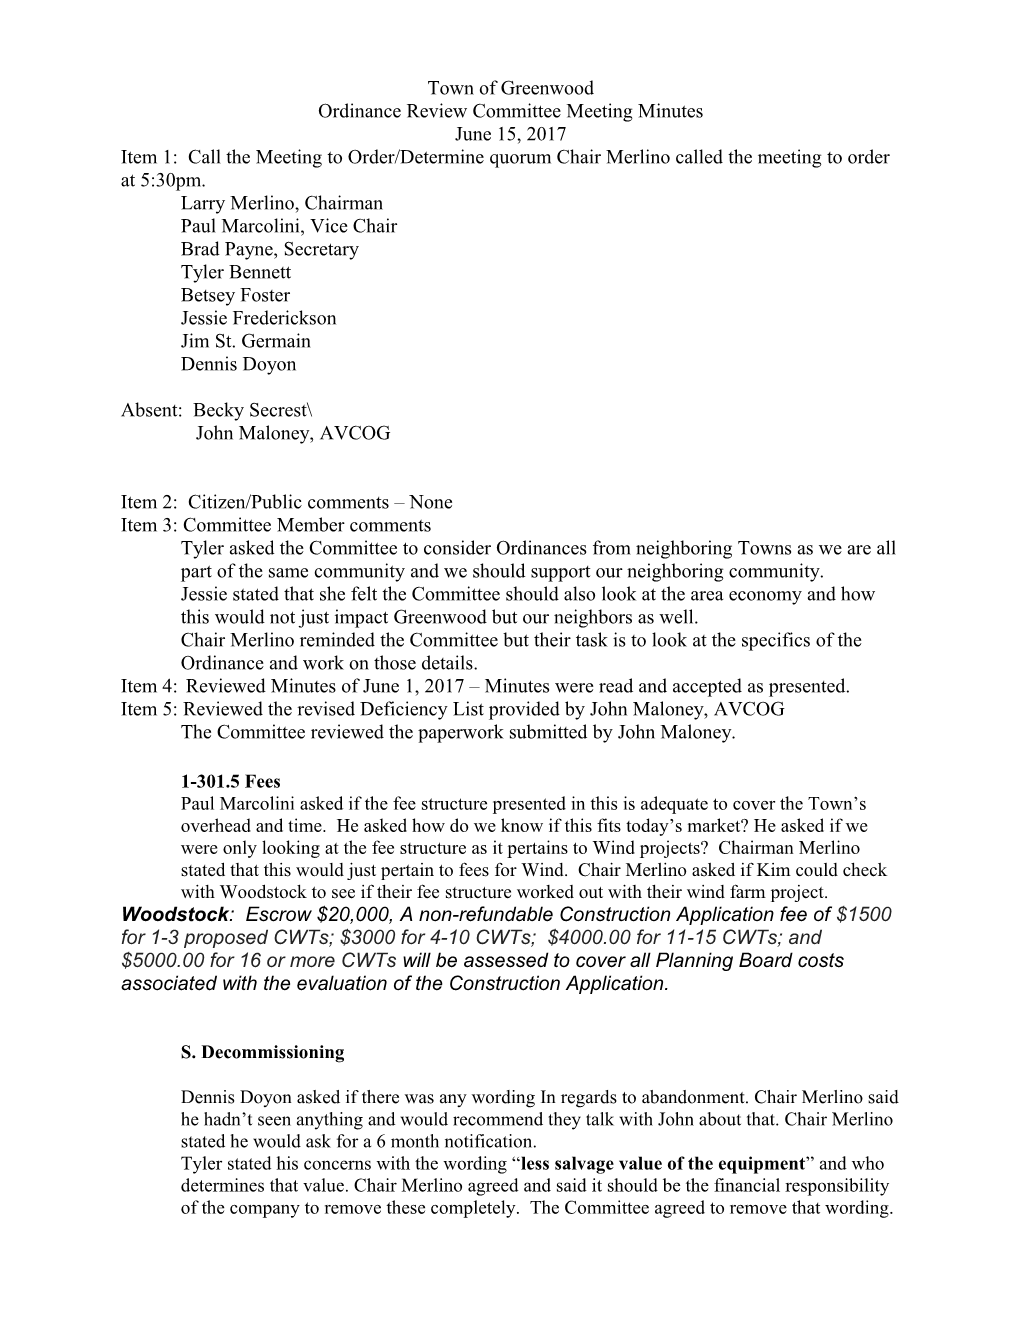 Ordinance Review Committee Meeting Minutes s1